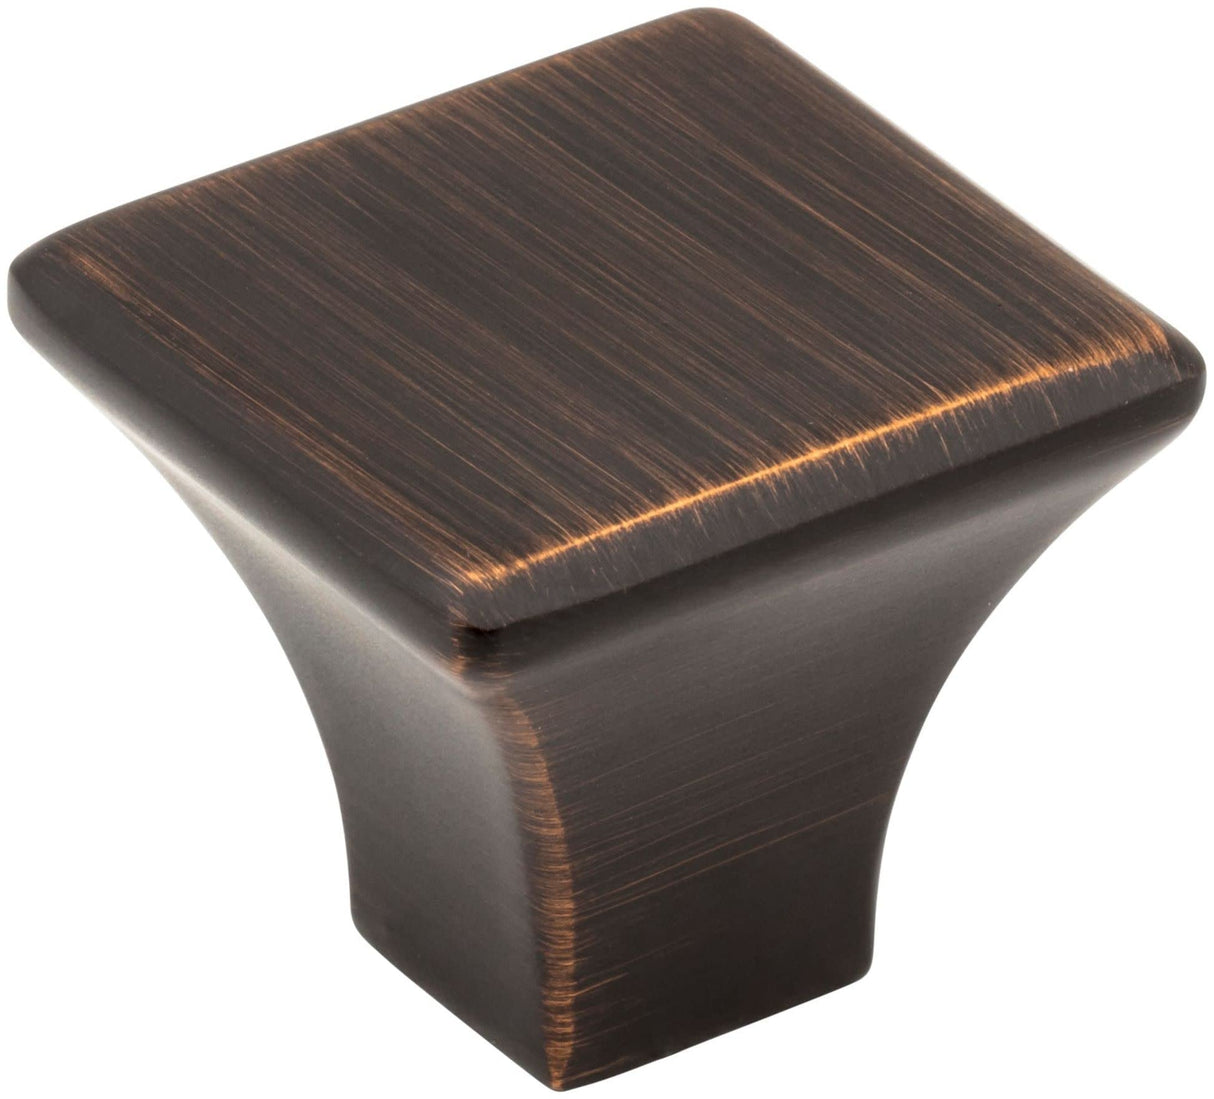 Jeffrey Alexander 972DBAC 1-1/8" Overall Length Brushed Oil Rubbed Bronze Square Marlo Cabinet Knob